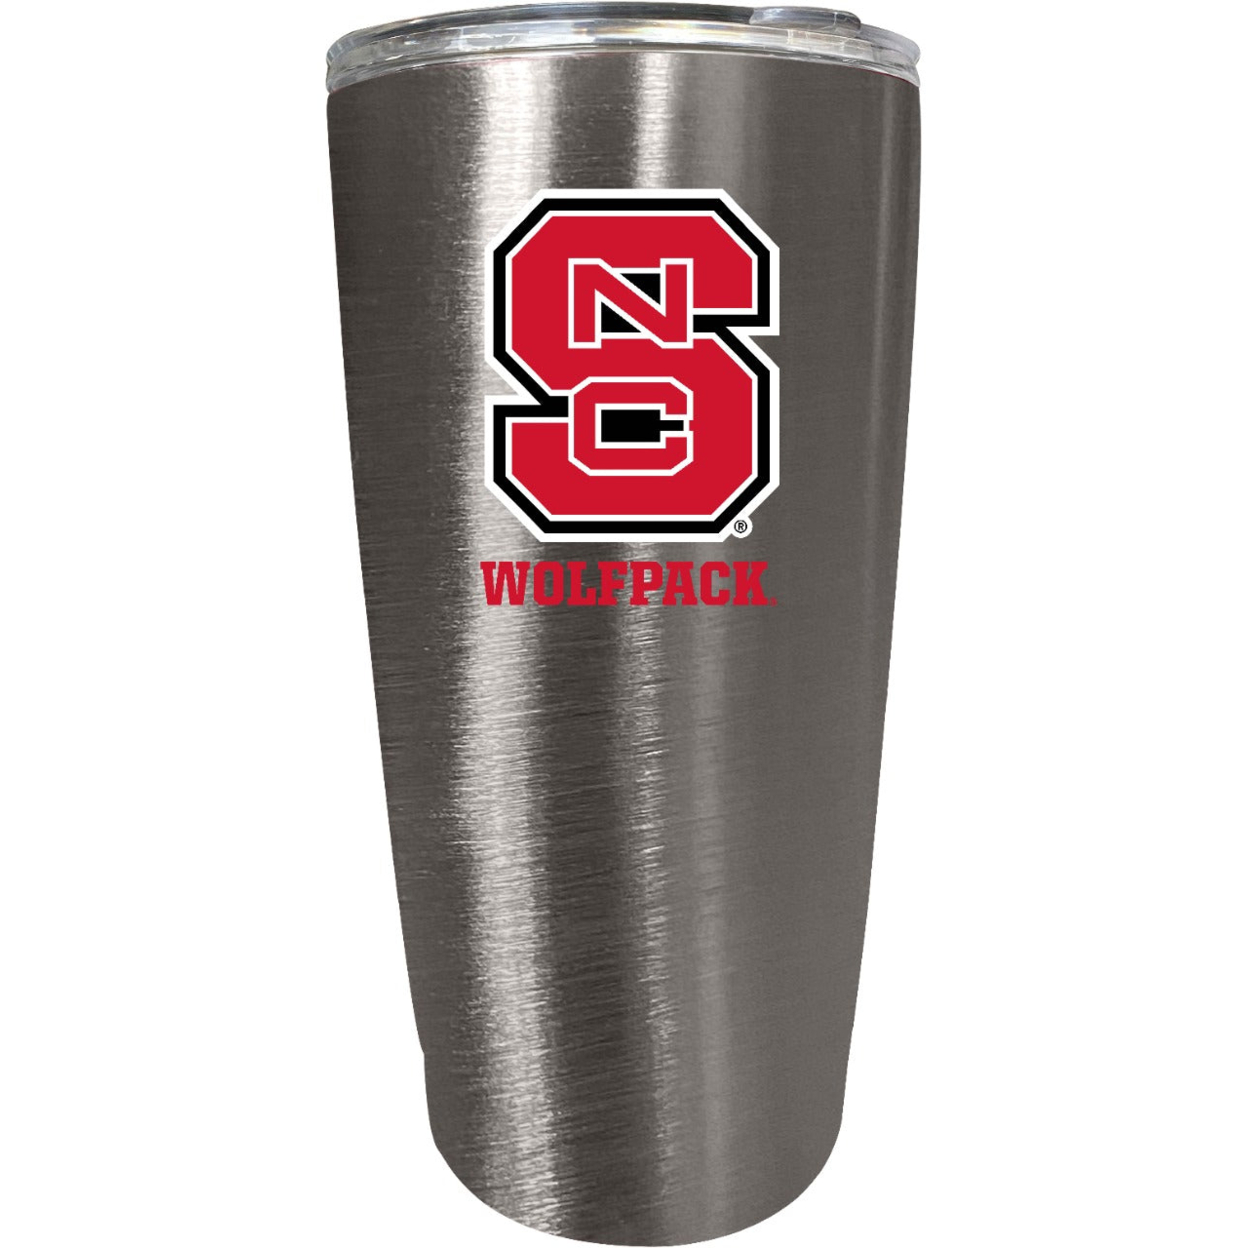 NC State Wolfpack 16 Oz Insulated Stainless Steel Tumbler Colorless